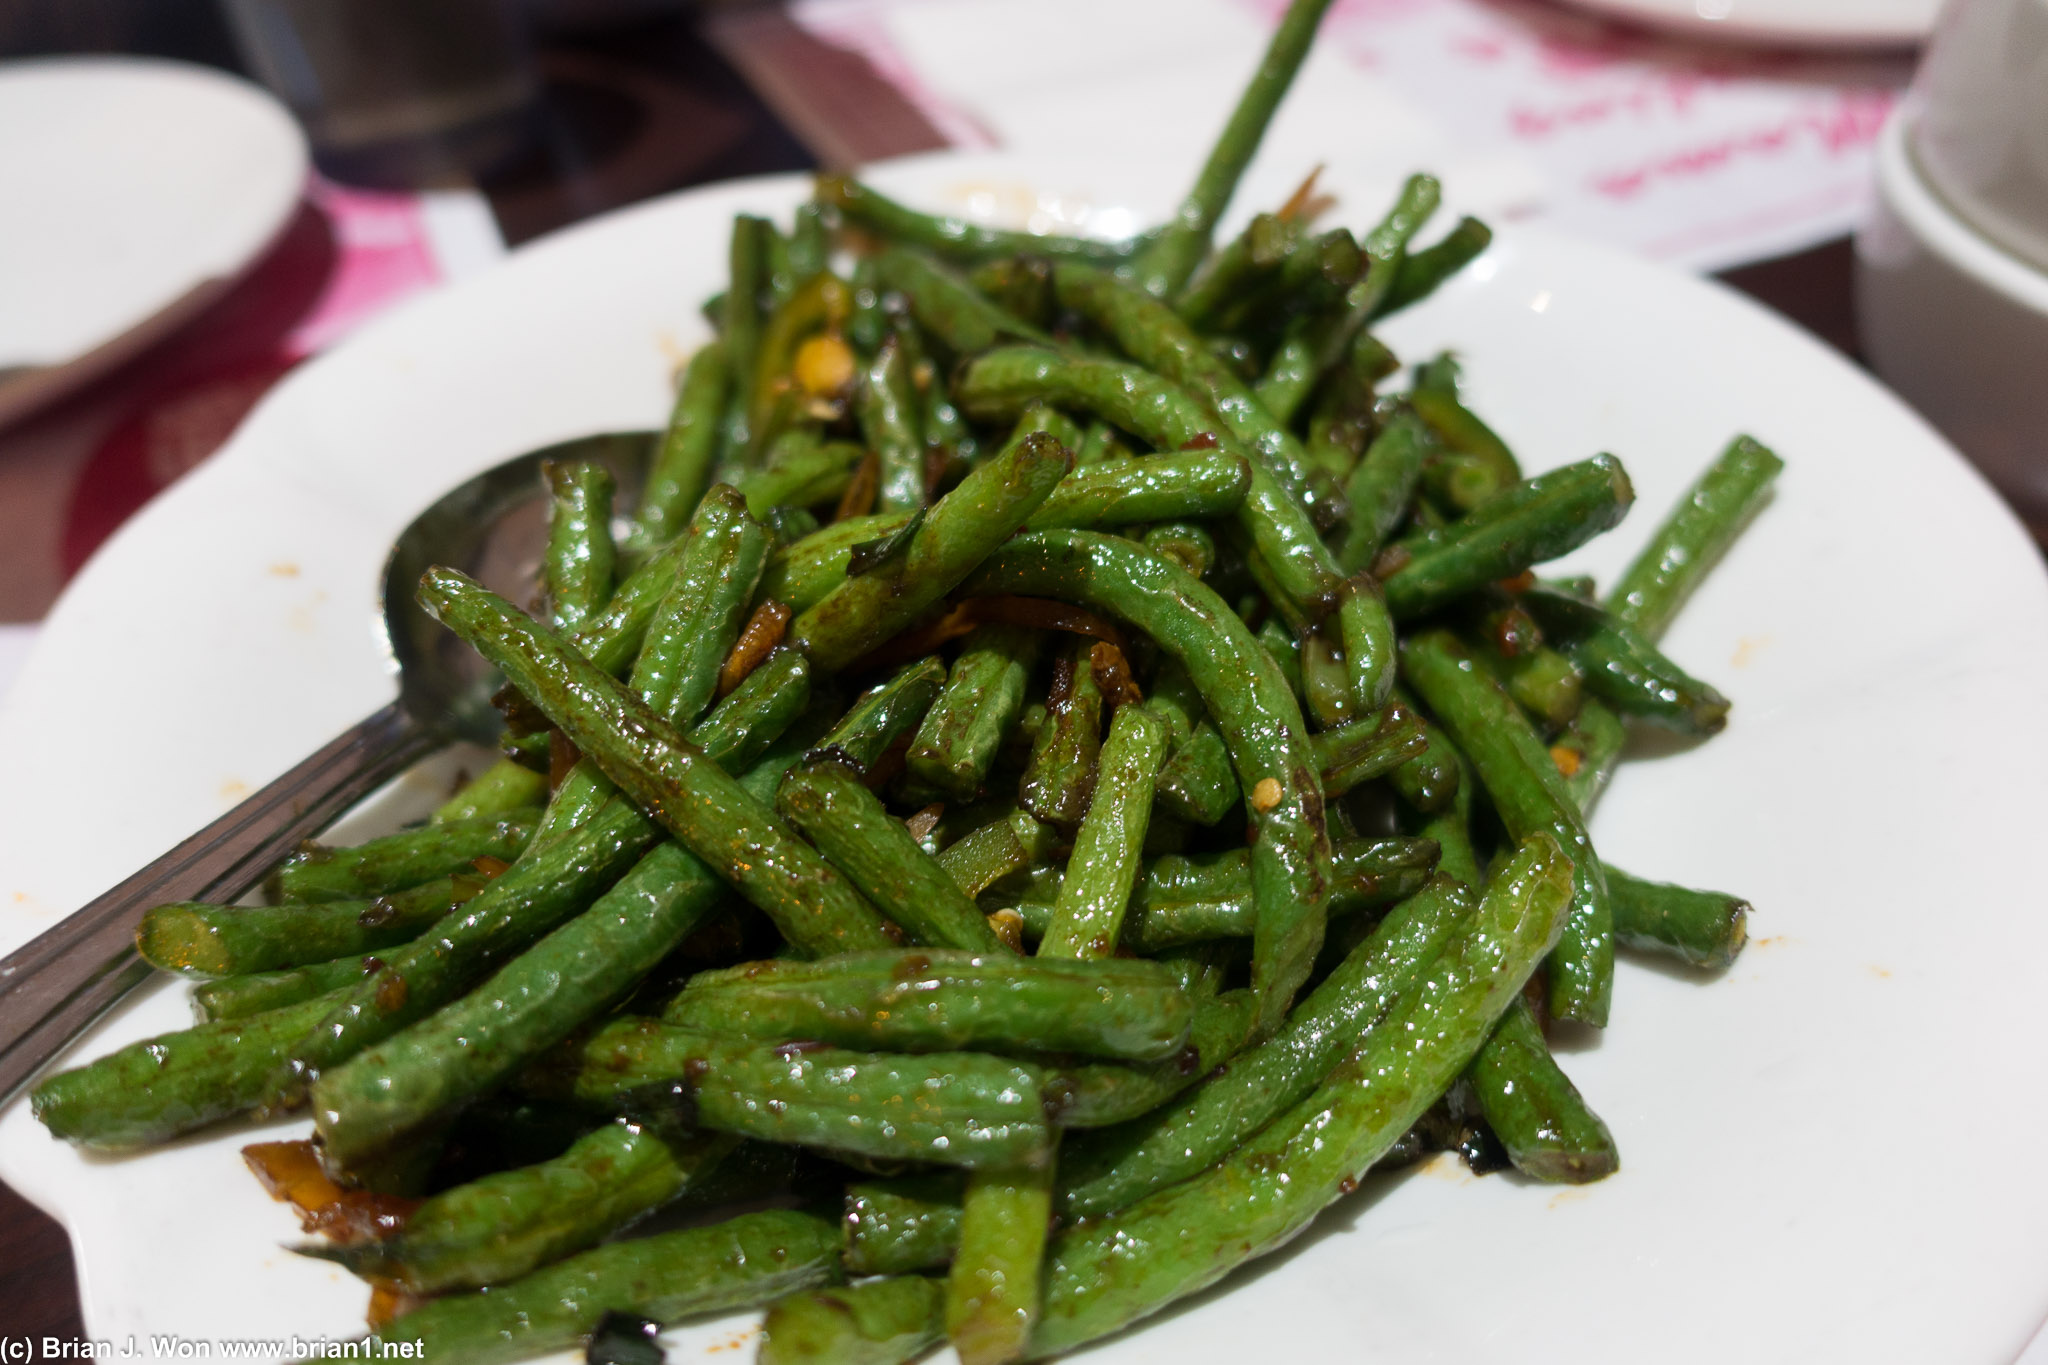 Green beans at Mama's Lu are pretty decent. Nowhere as good as DTF tho.